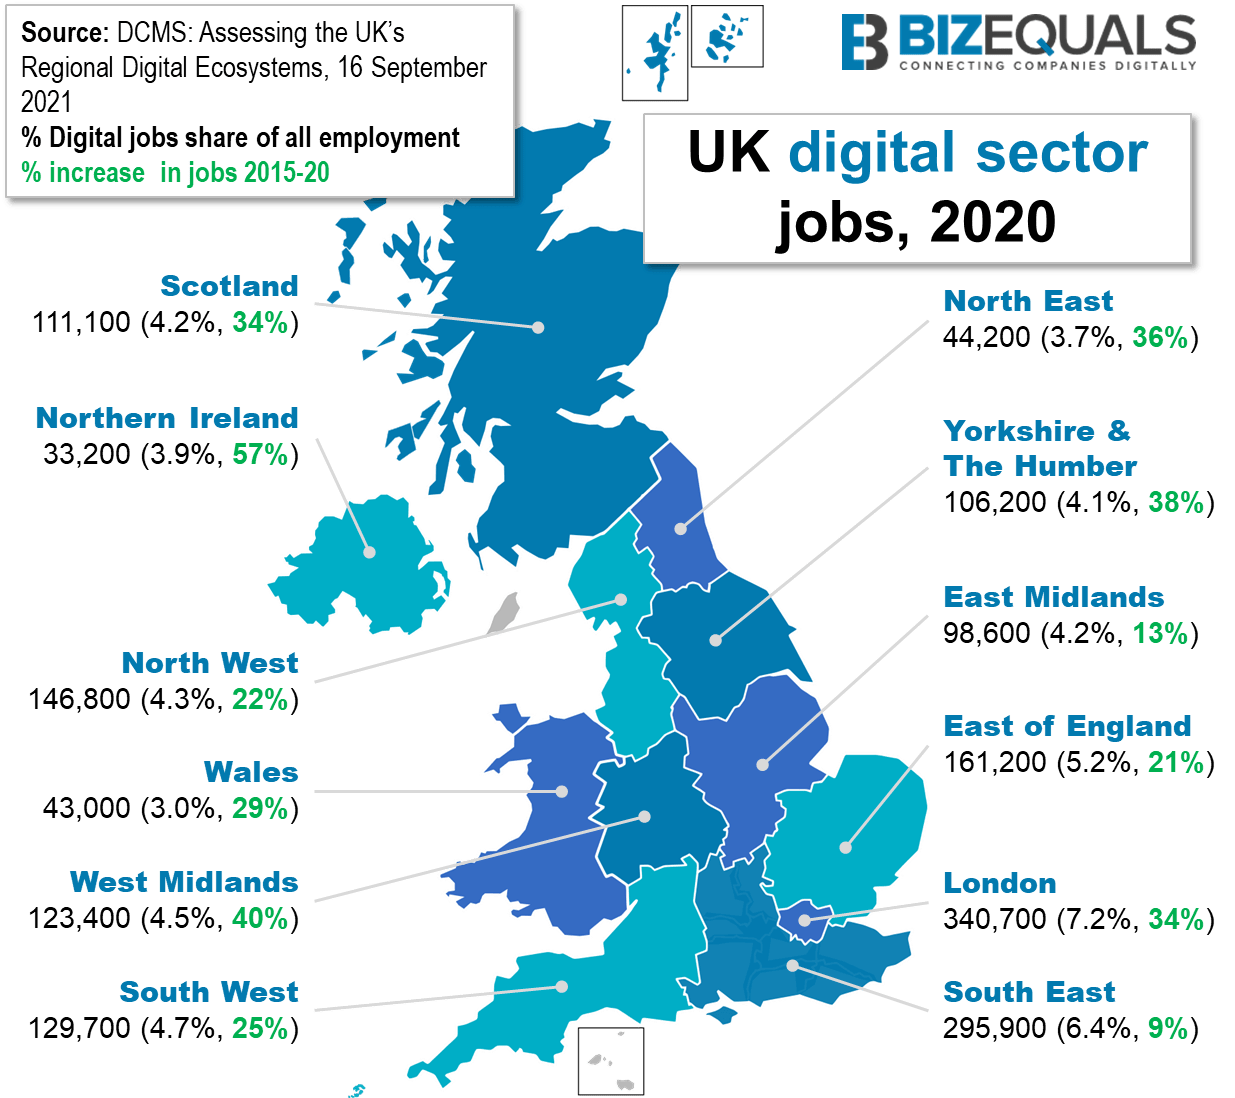 Map of UK showing digital sector jobs by region